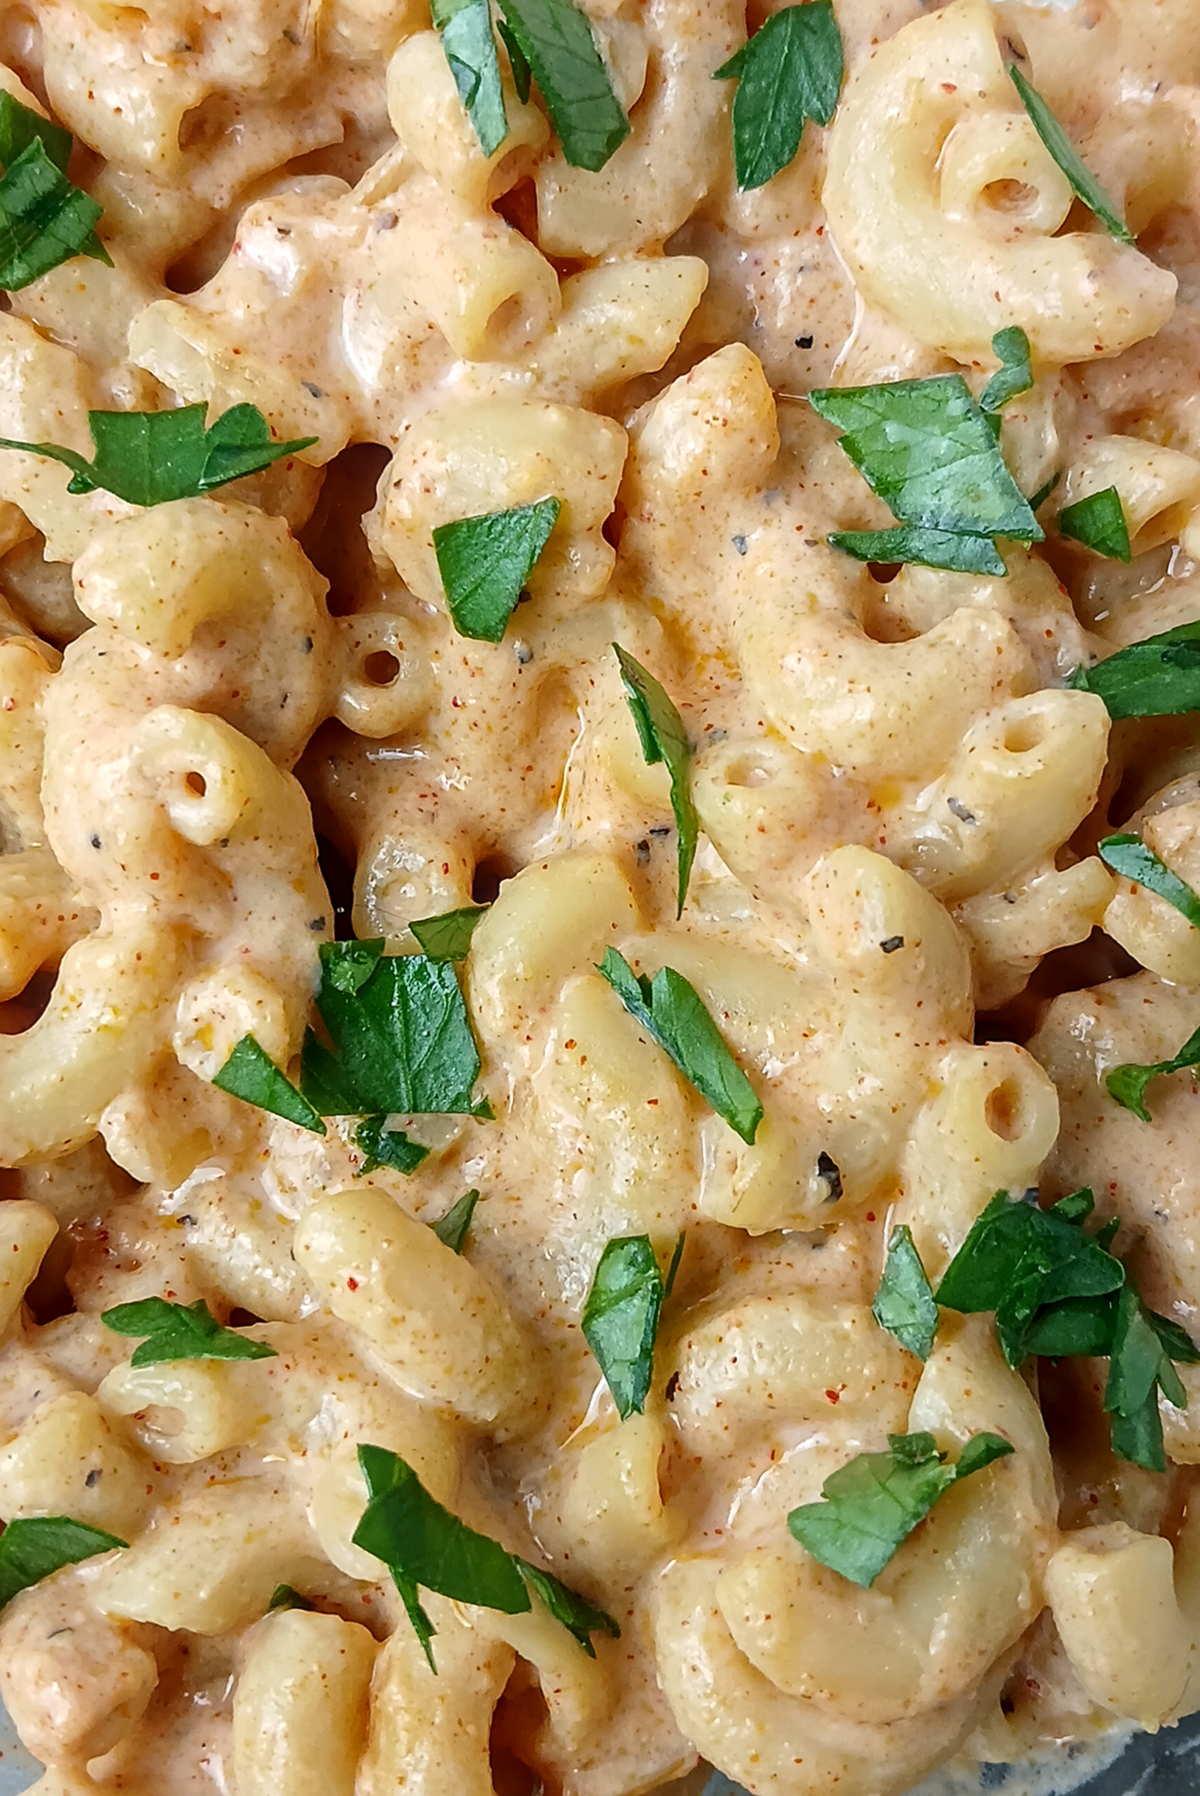 Extreme closeup of creamy, cheesy low sodium mac and cheese.